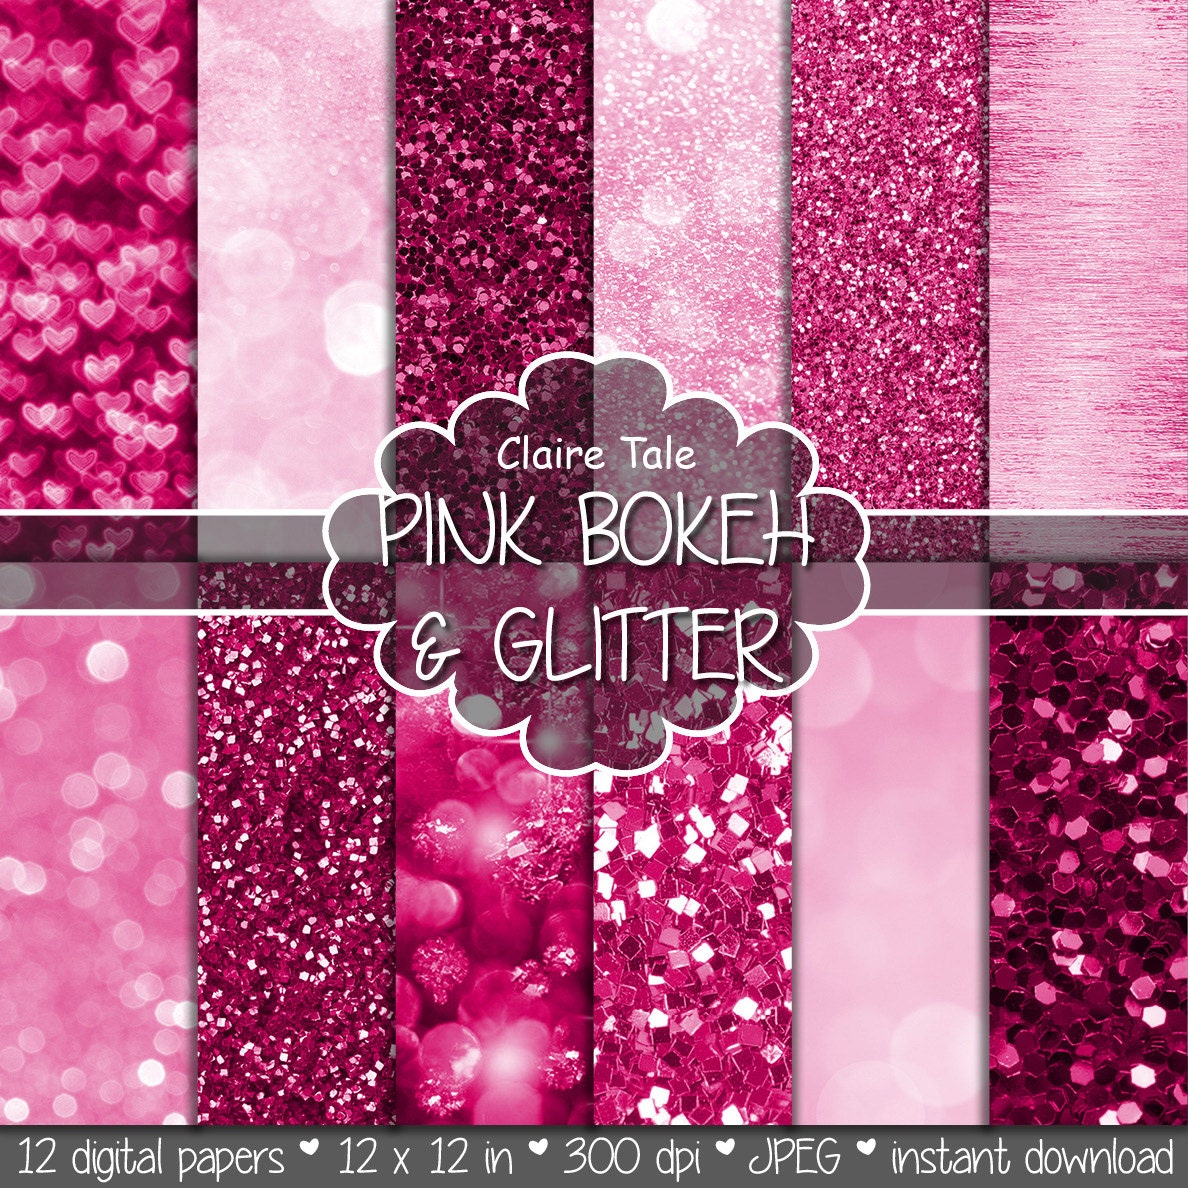 Download Pink digital paper: PINK BOKEH & GLITTER with pink